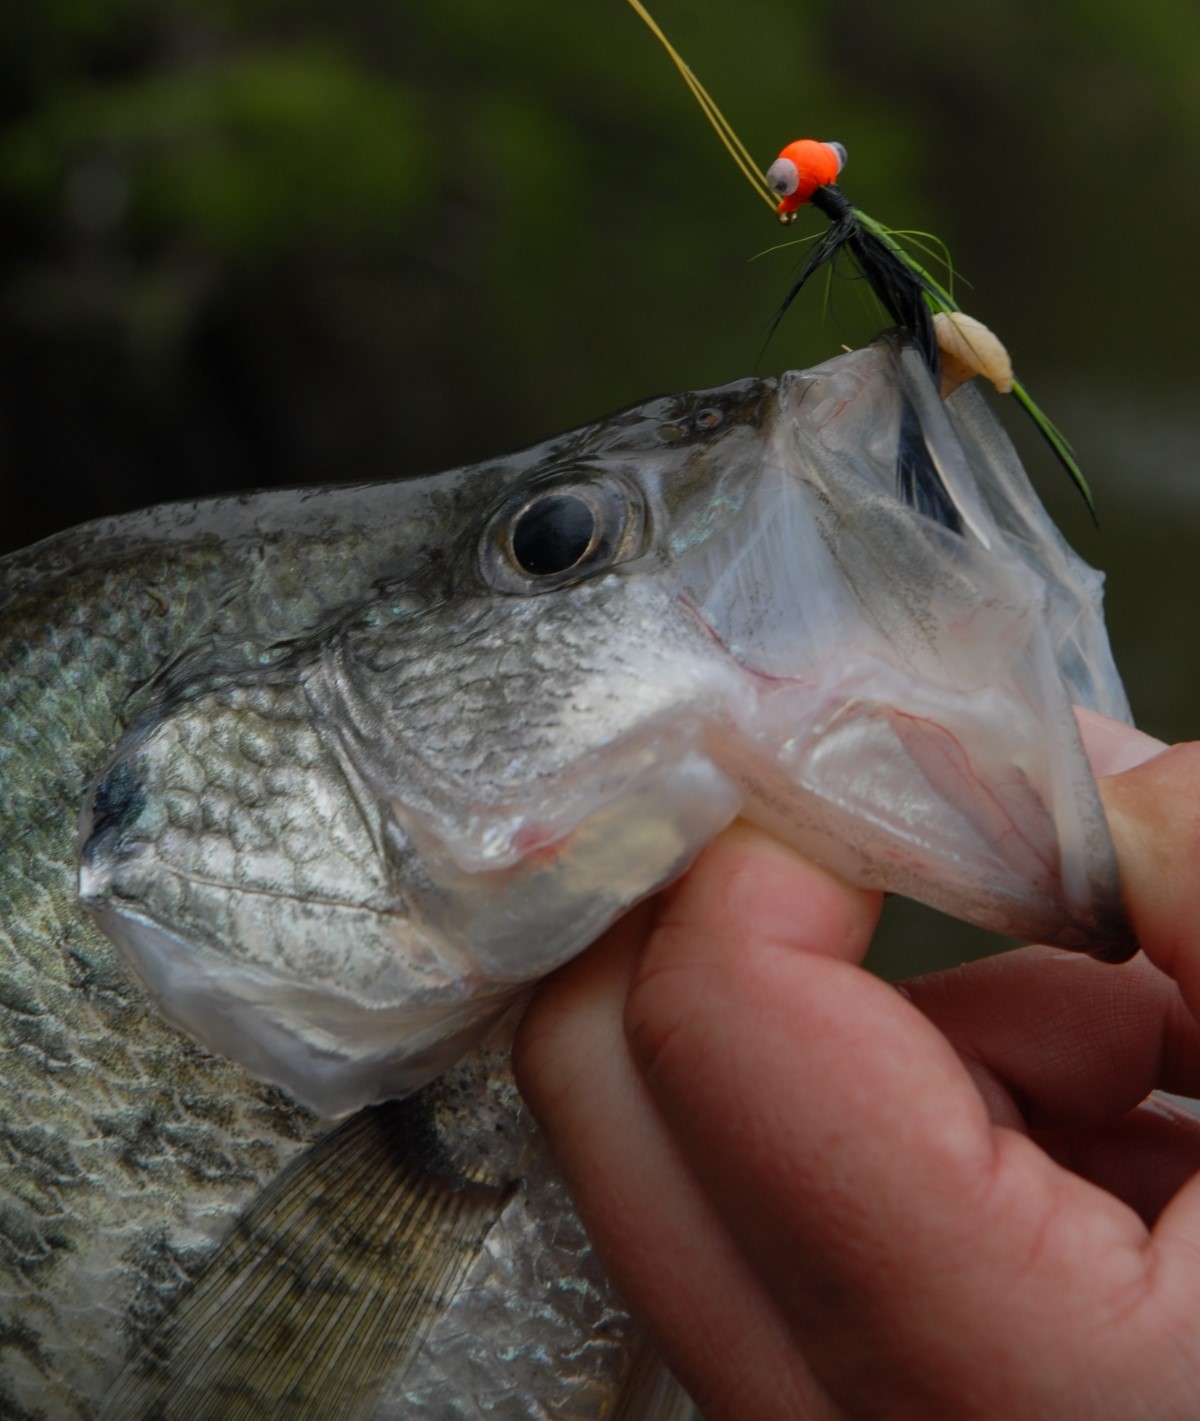 A crappie fish being held showing the fishing lure it was caught with. 